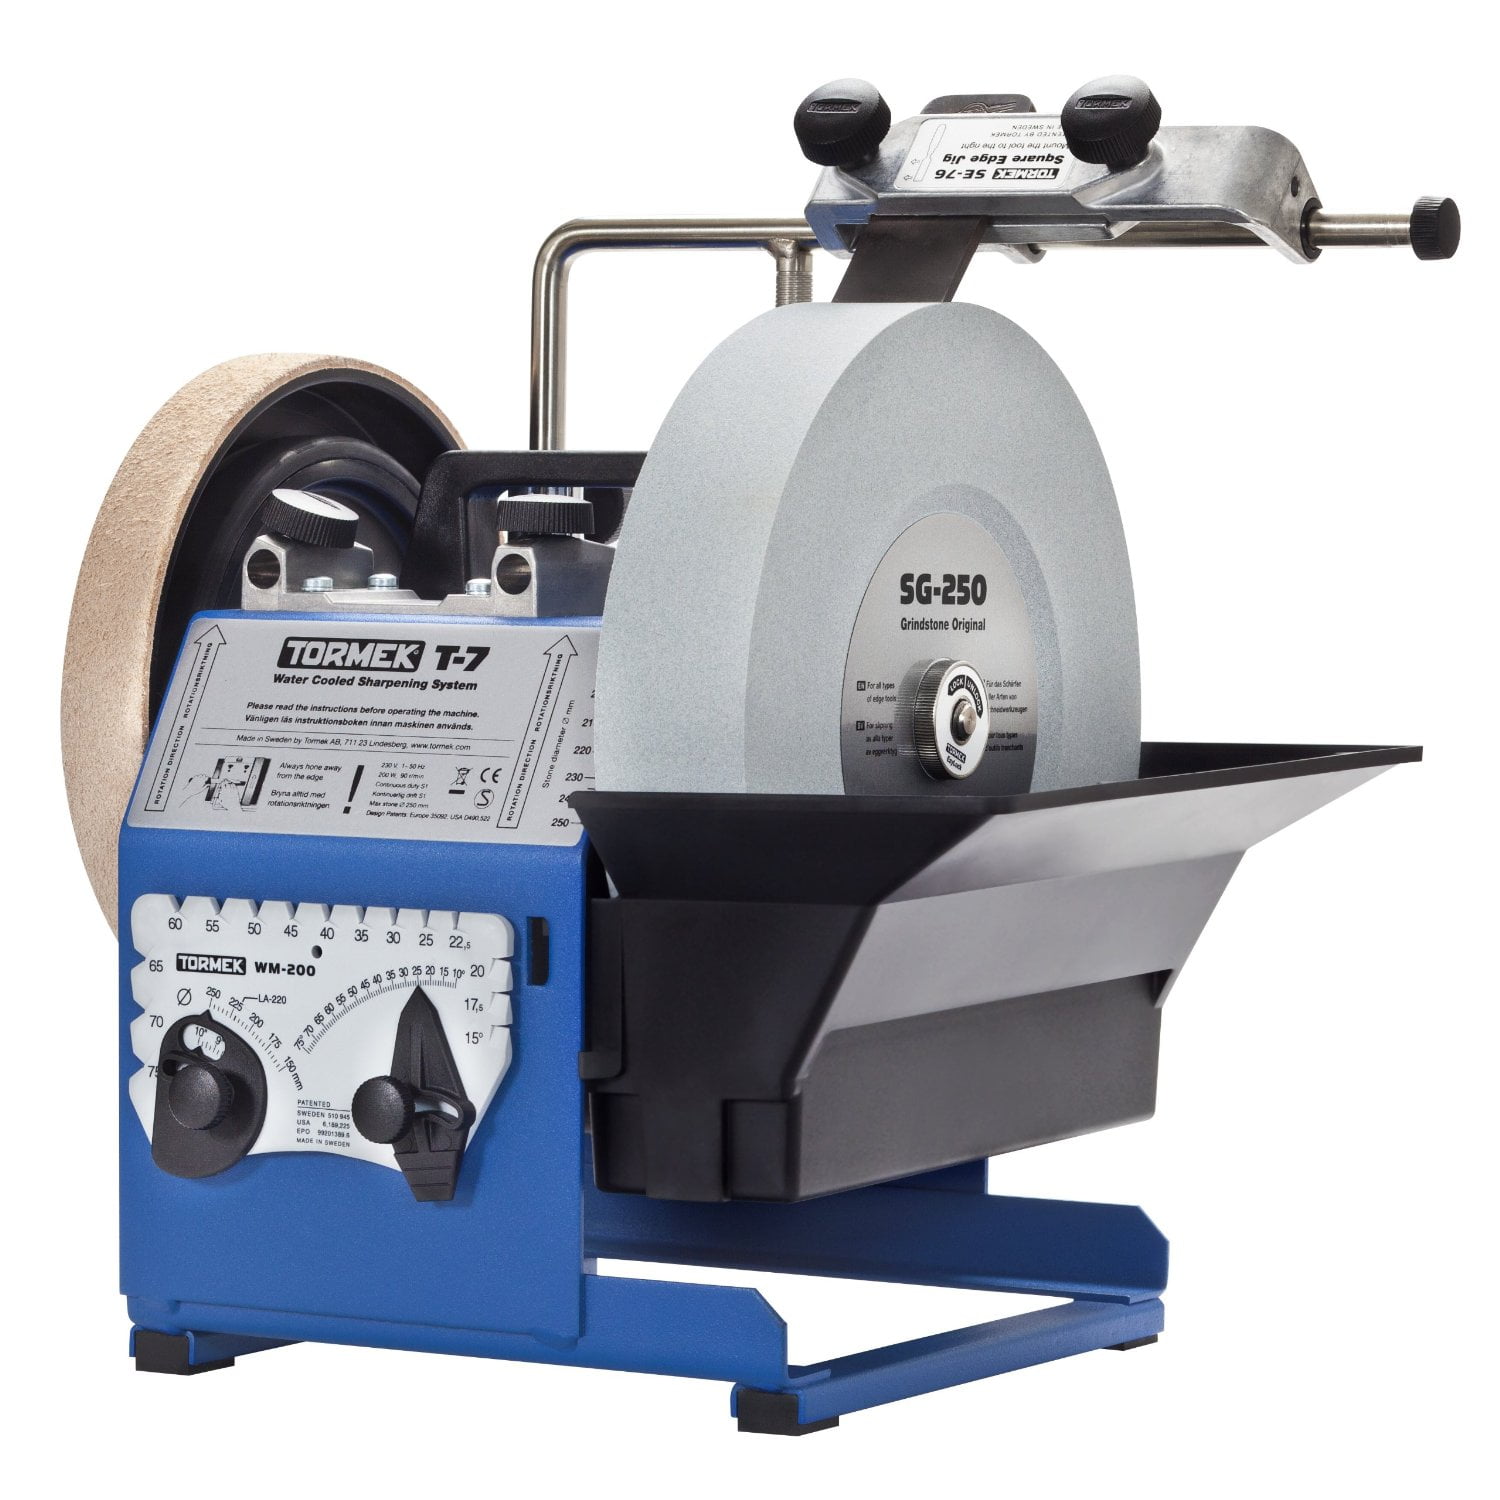 Tormek T-7 Water Cooled Precision Sharpening System, 10 Inch Stone